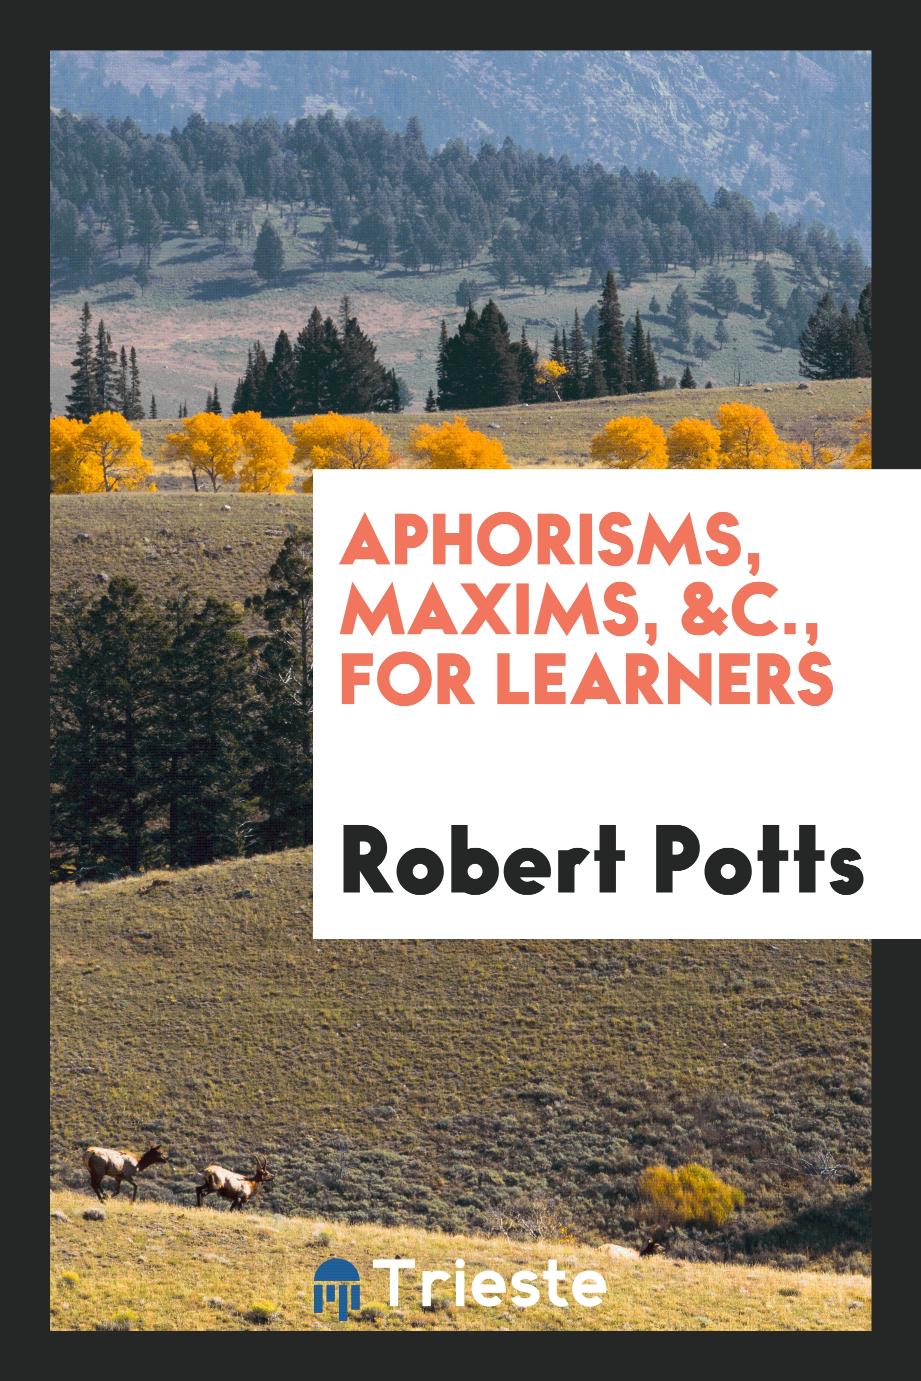 Aphorisms, maxims, &c., for learners